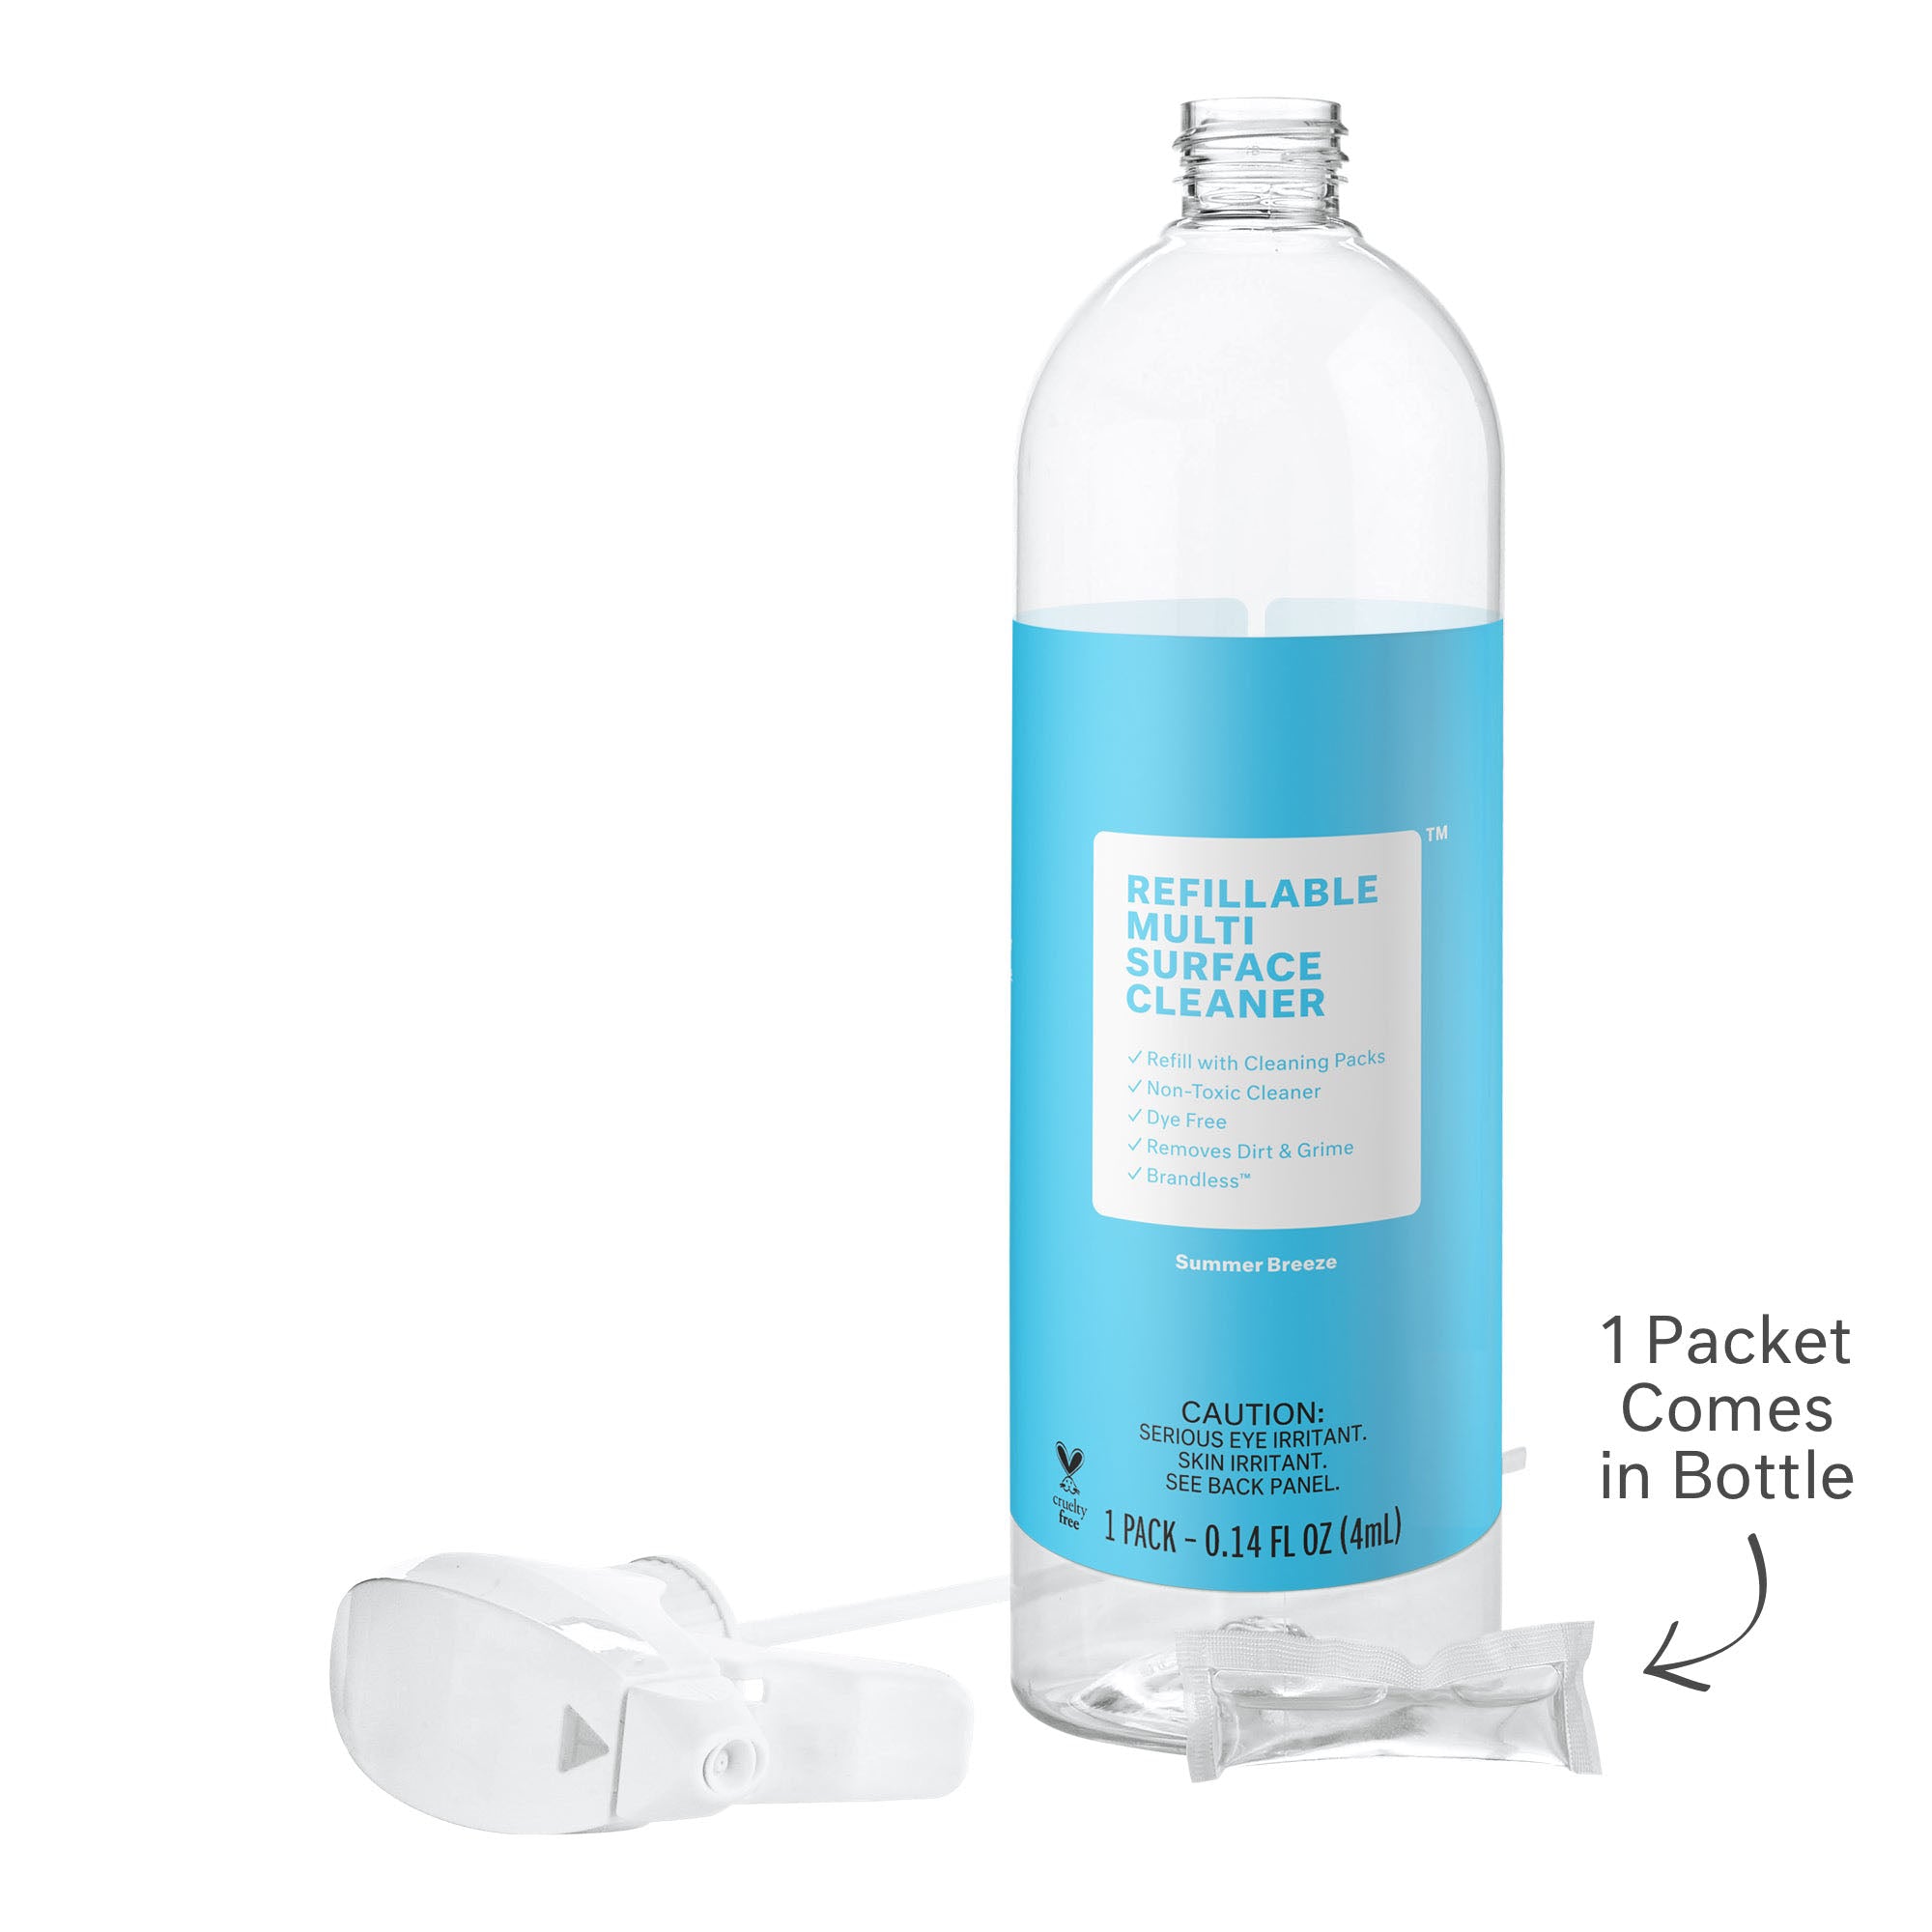 Multi surface cleaner bottle front view with visual of refill packet